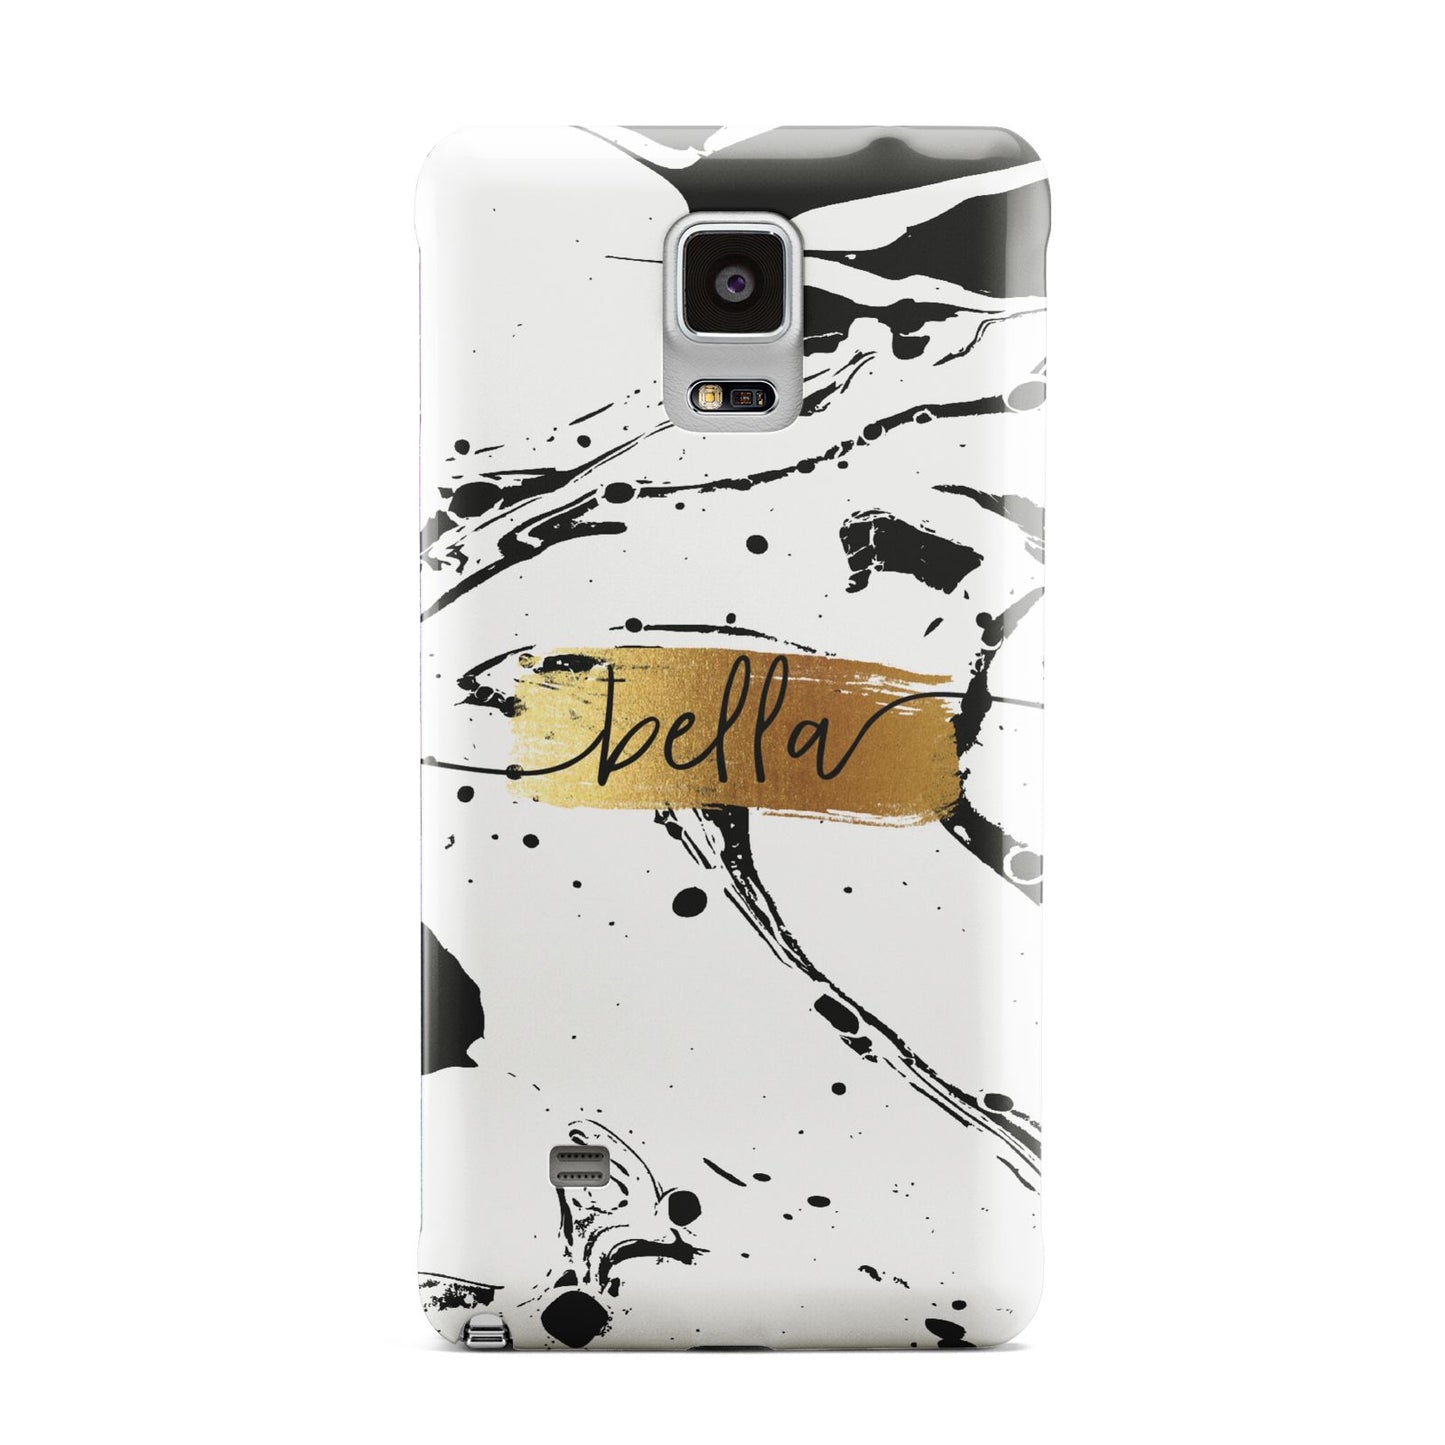 Personalised White Gold Swirl Marble Samsung Galaxy Note 4 Case